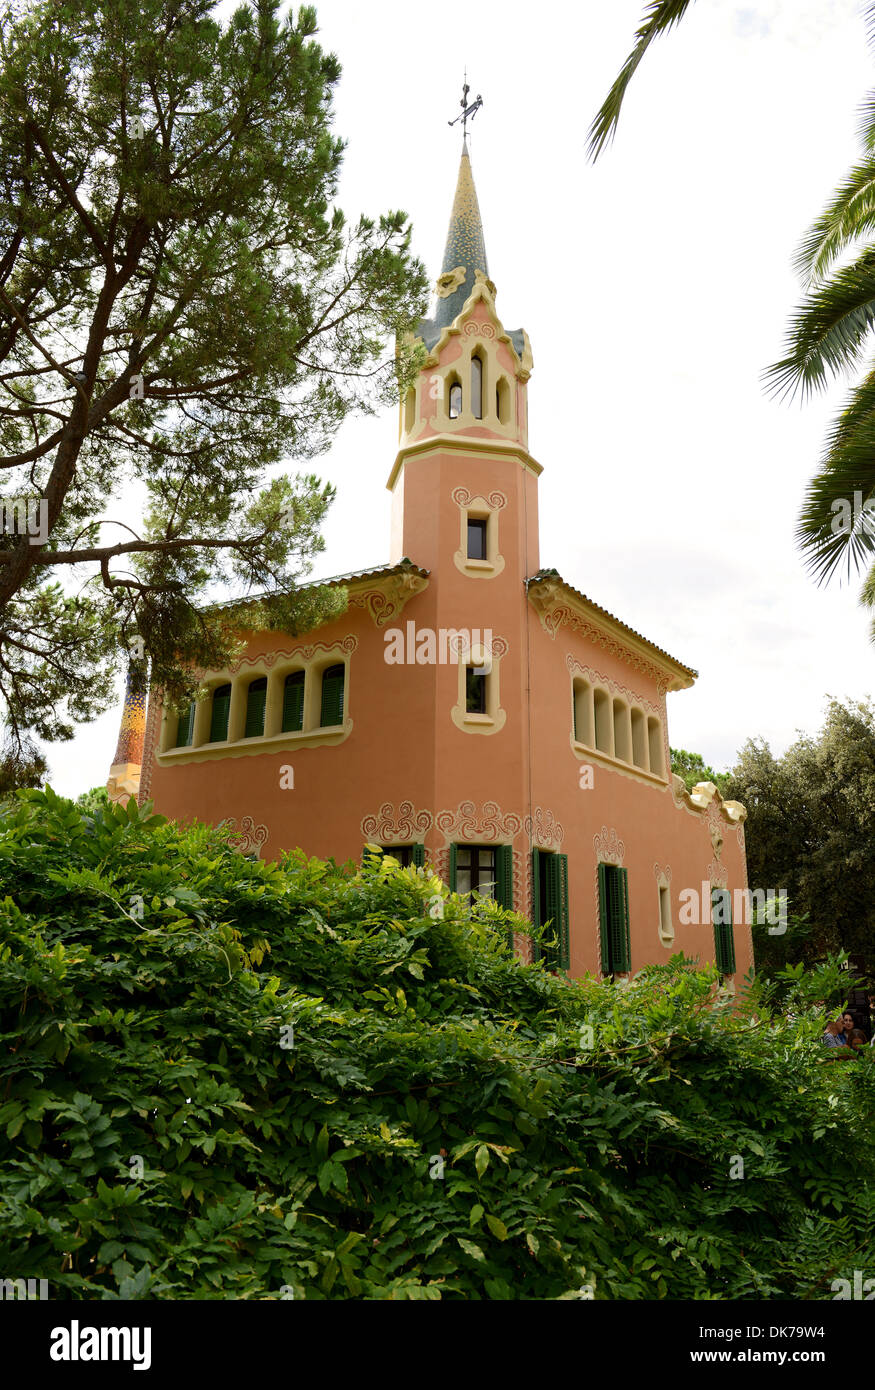 Casa Museu Gaudi in Parc Guell, the home and museum dedicated to Antoni Gaudi, Barcelona, Spain Stock Photo